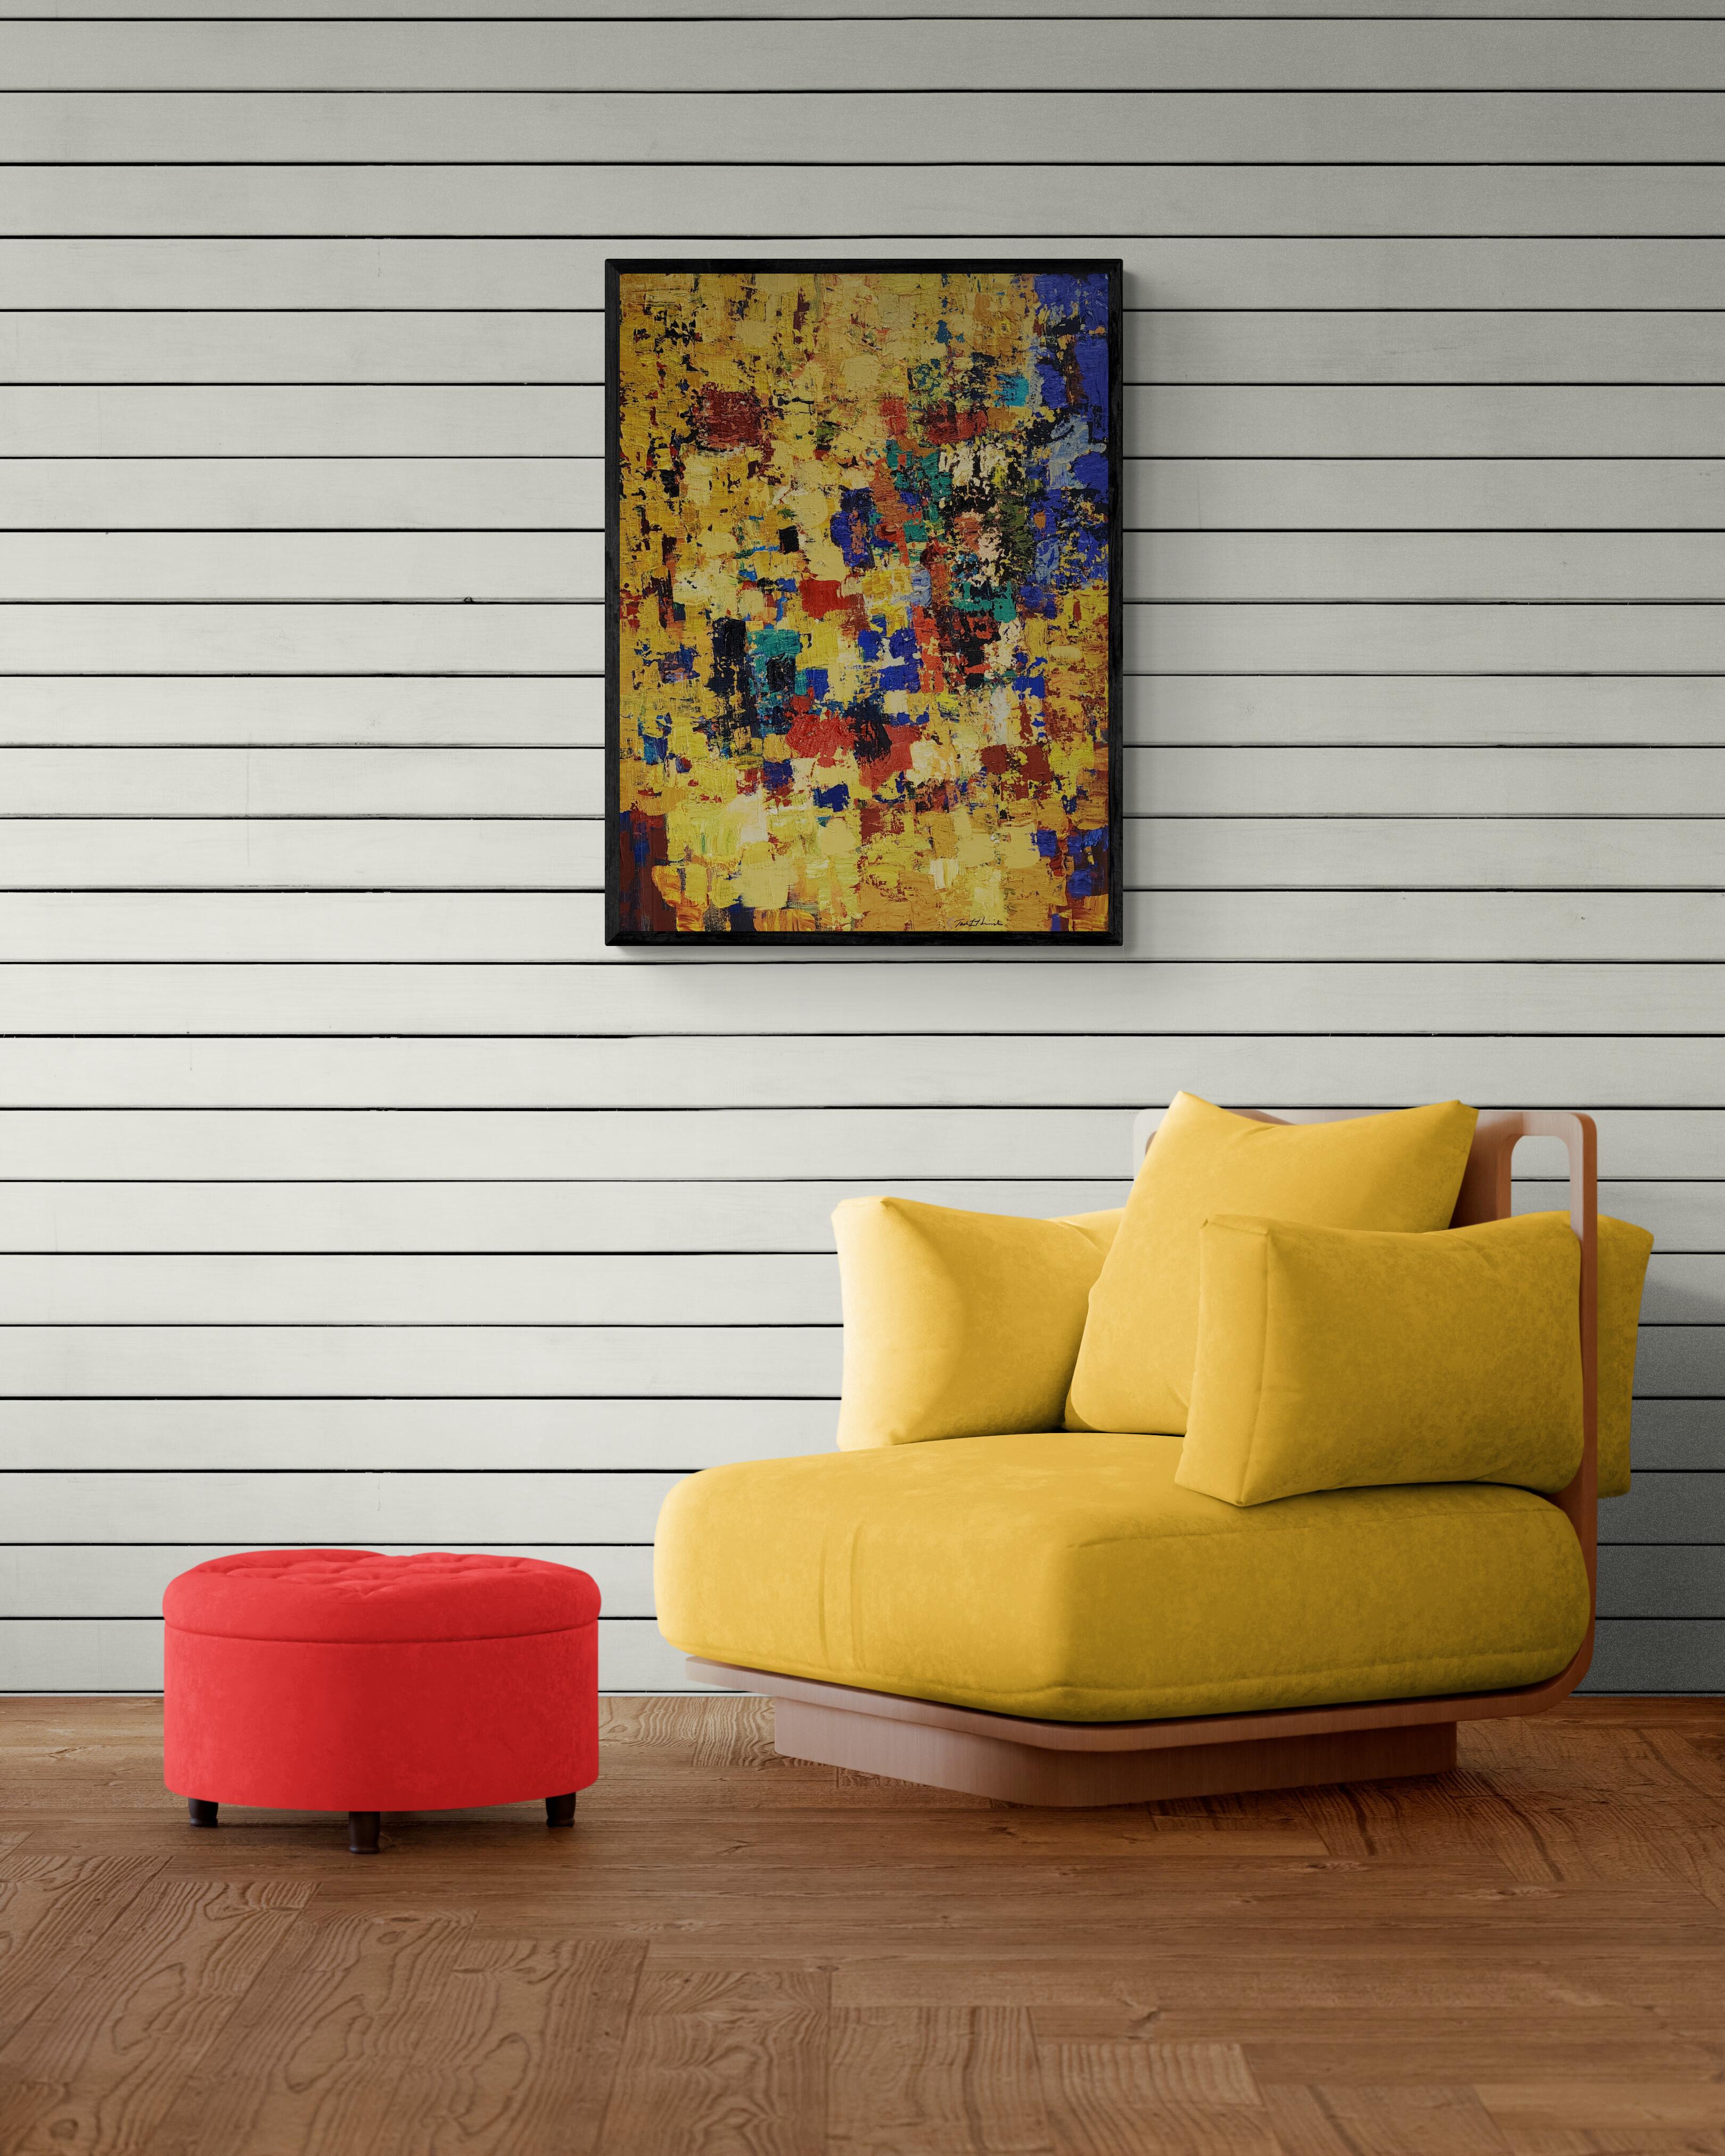 Calipso (Impasto, Gold, Gold Leaf, Yellow, Blue, Teal, Red, Orange) - Painting by Ted Hinrichs